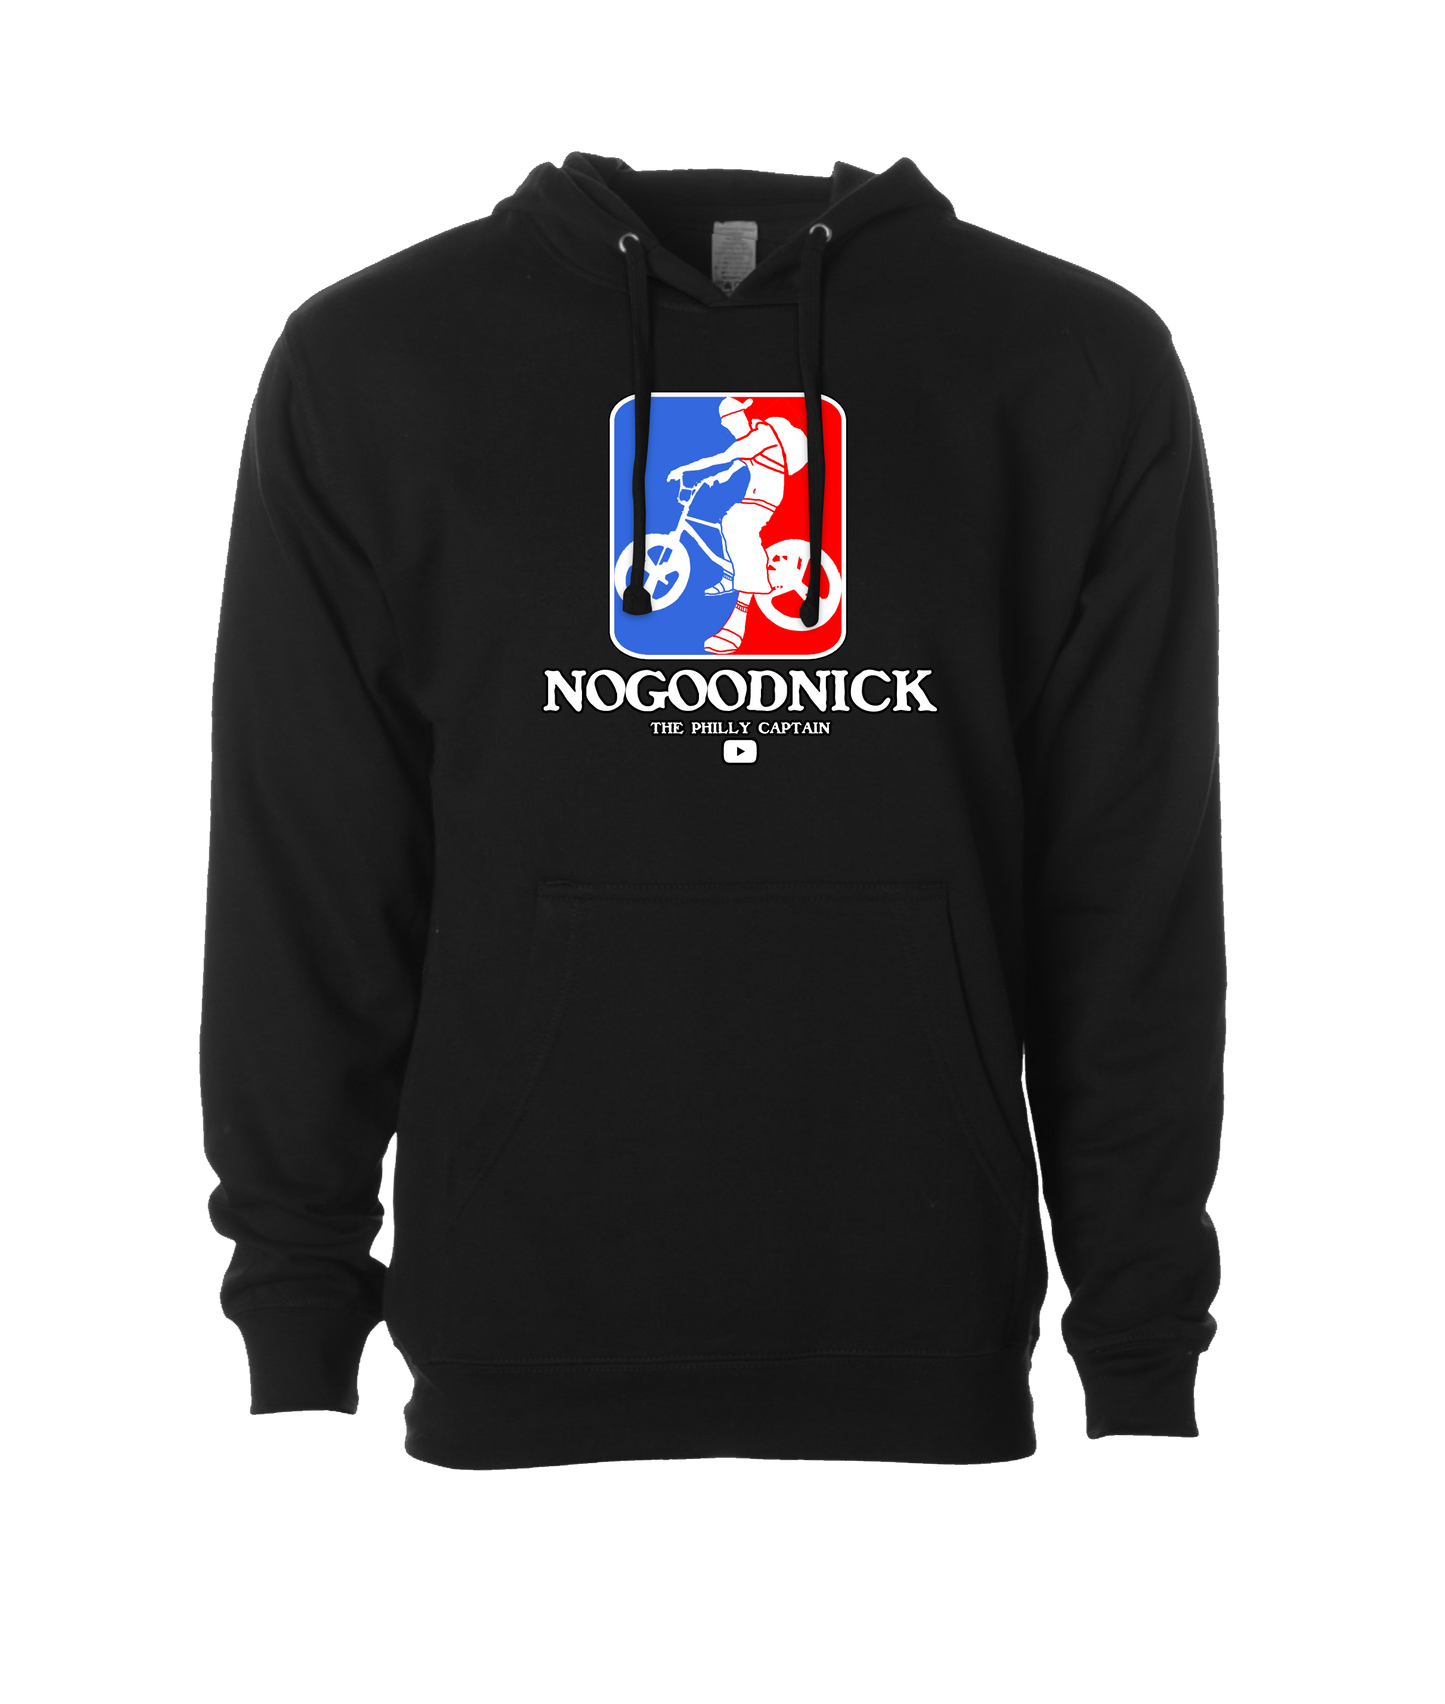 The Philly Captain's Merch is Fire - No Good Nick - Black Hoodie